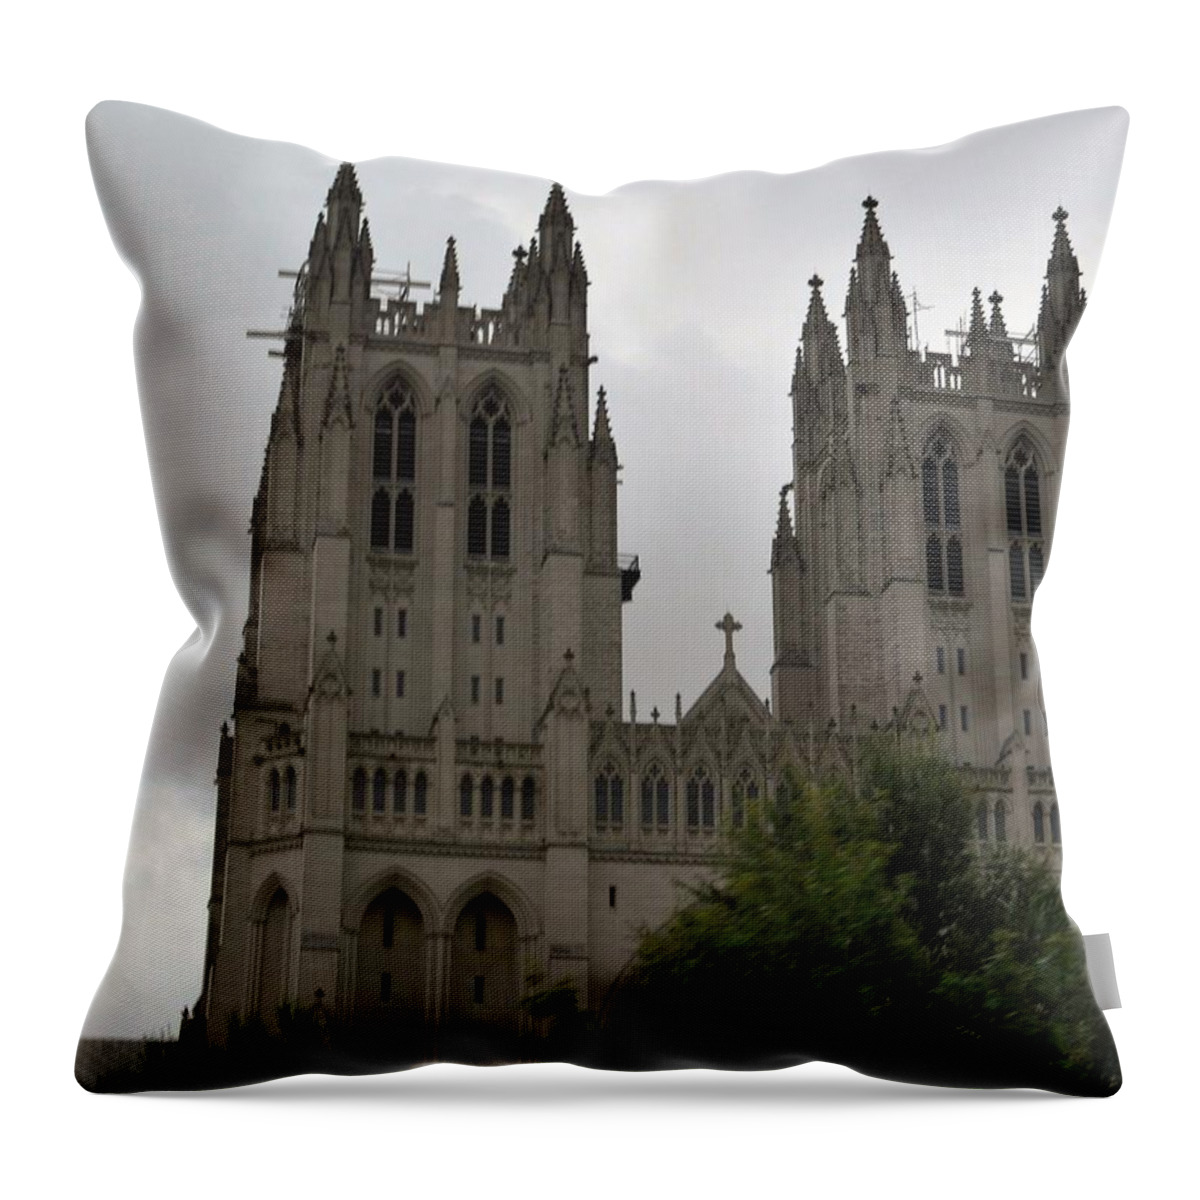 Worship Throw Pillow featuring the photograph God's House by Charles HALL